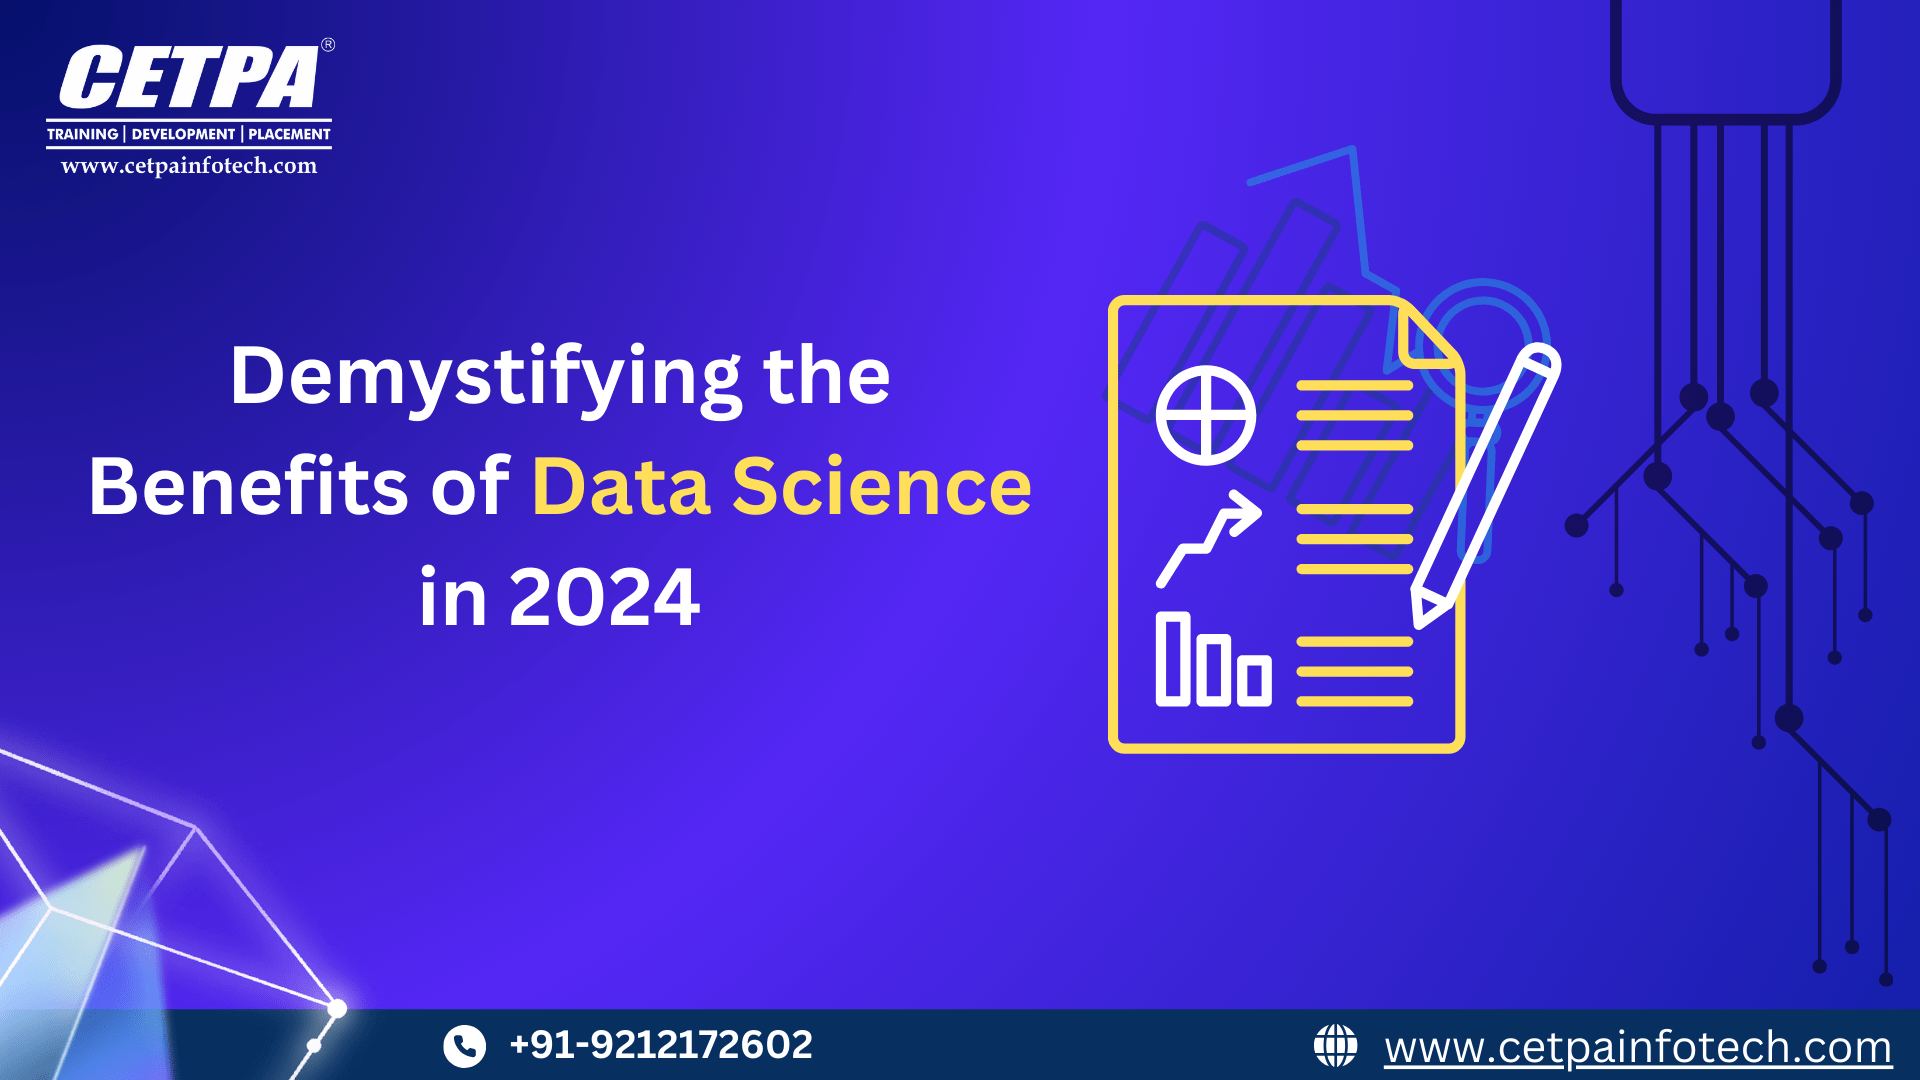 Demystifying the Benefits of Data Science in 2024